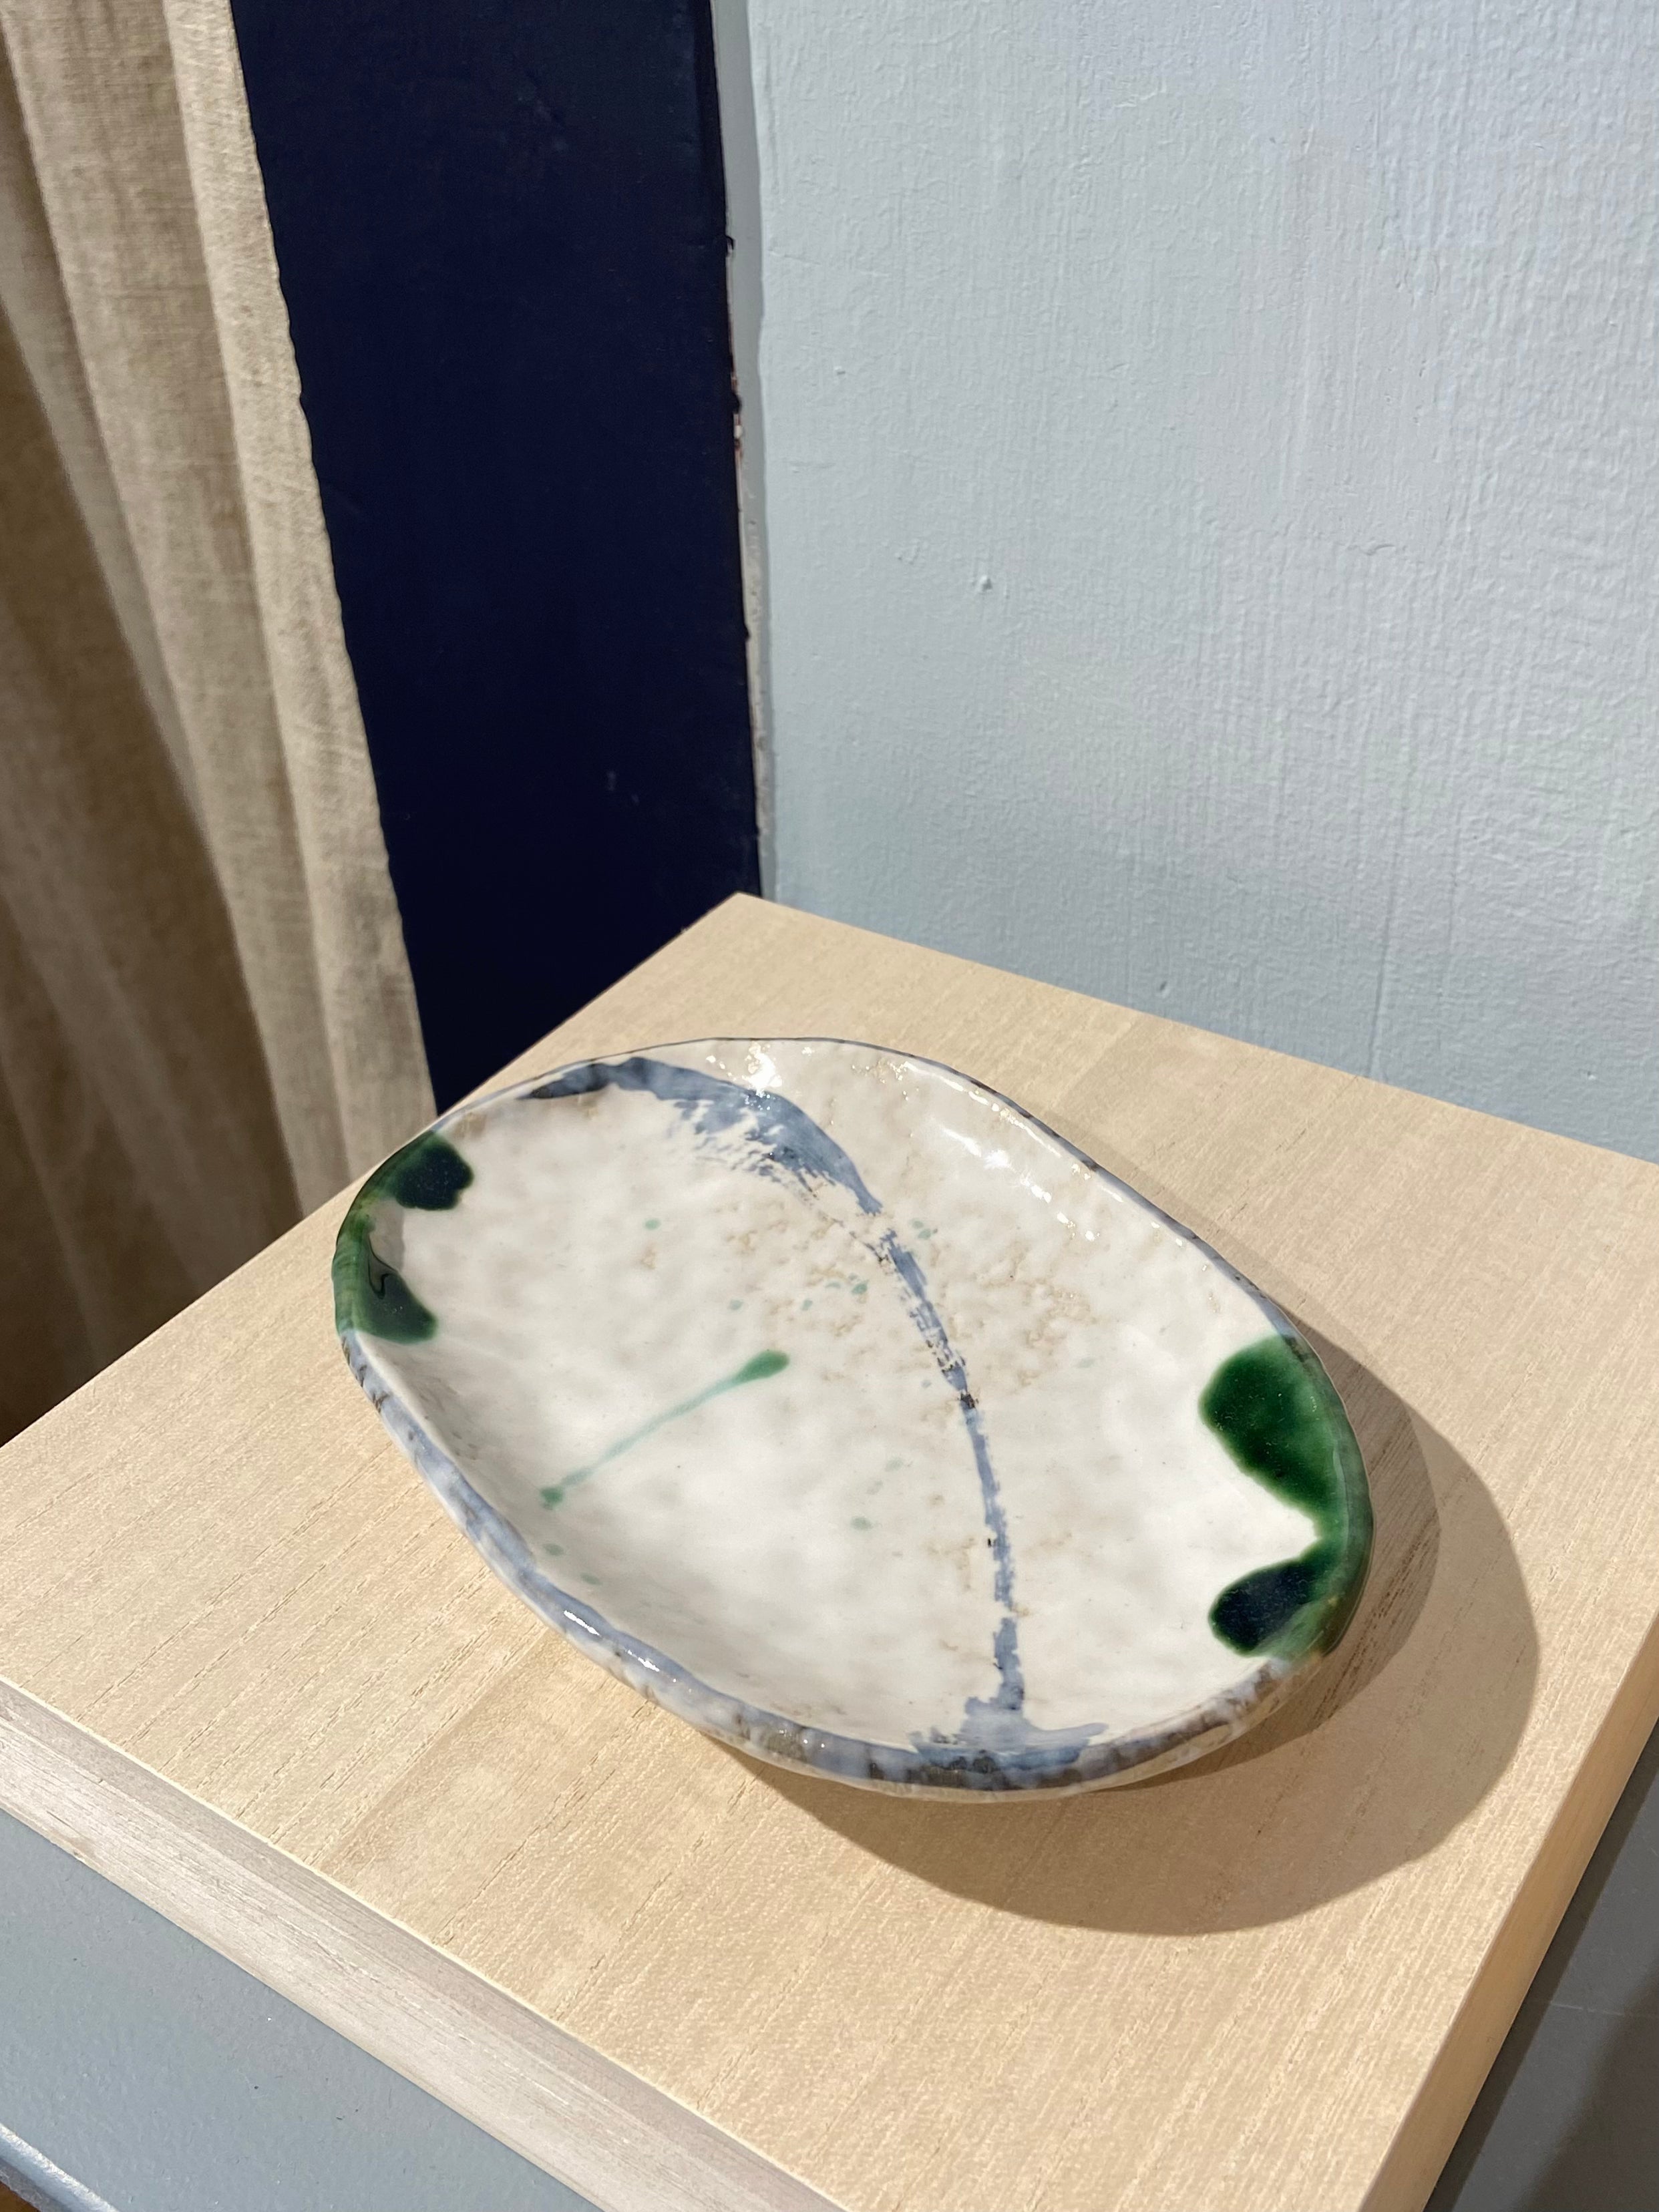 Japanese dish with blue and green pattern, small